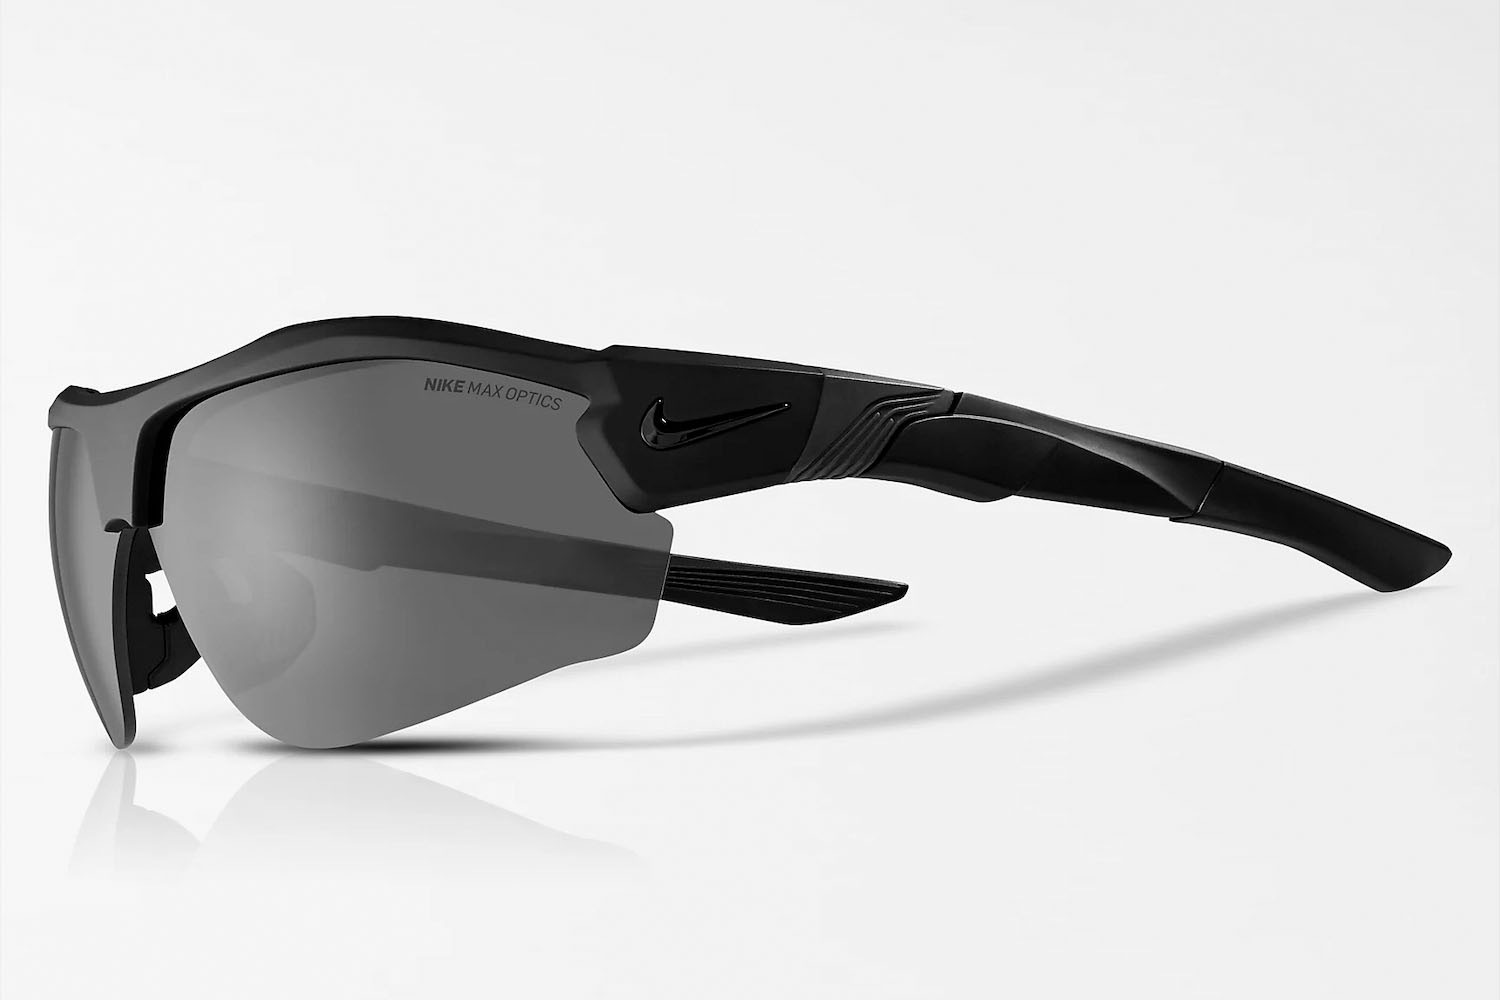 a pair of grey and black Nike Show X3 sunglasses on a white background